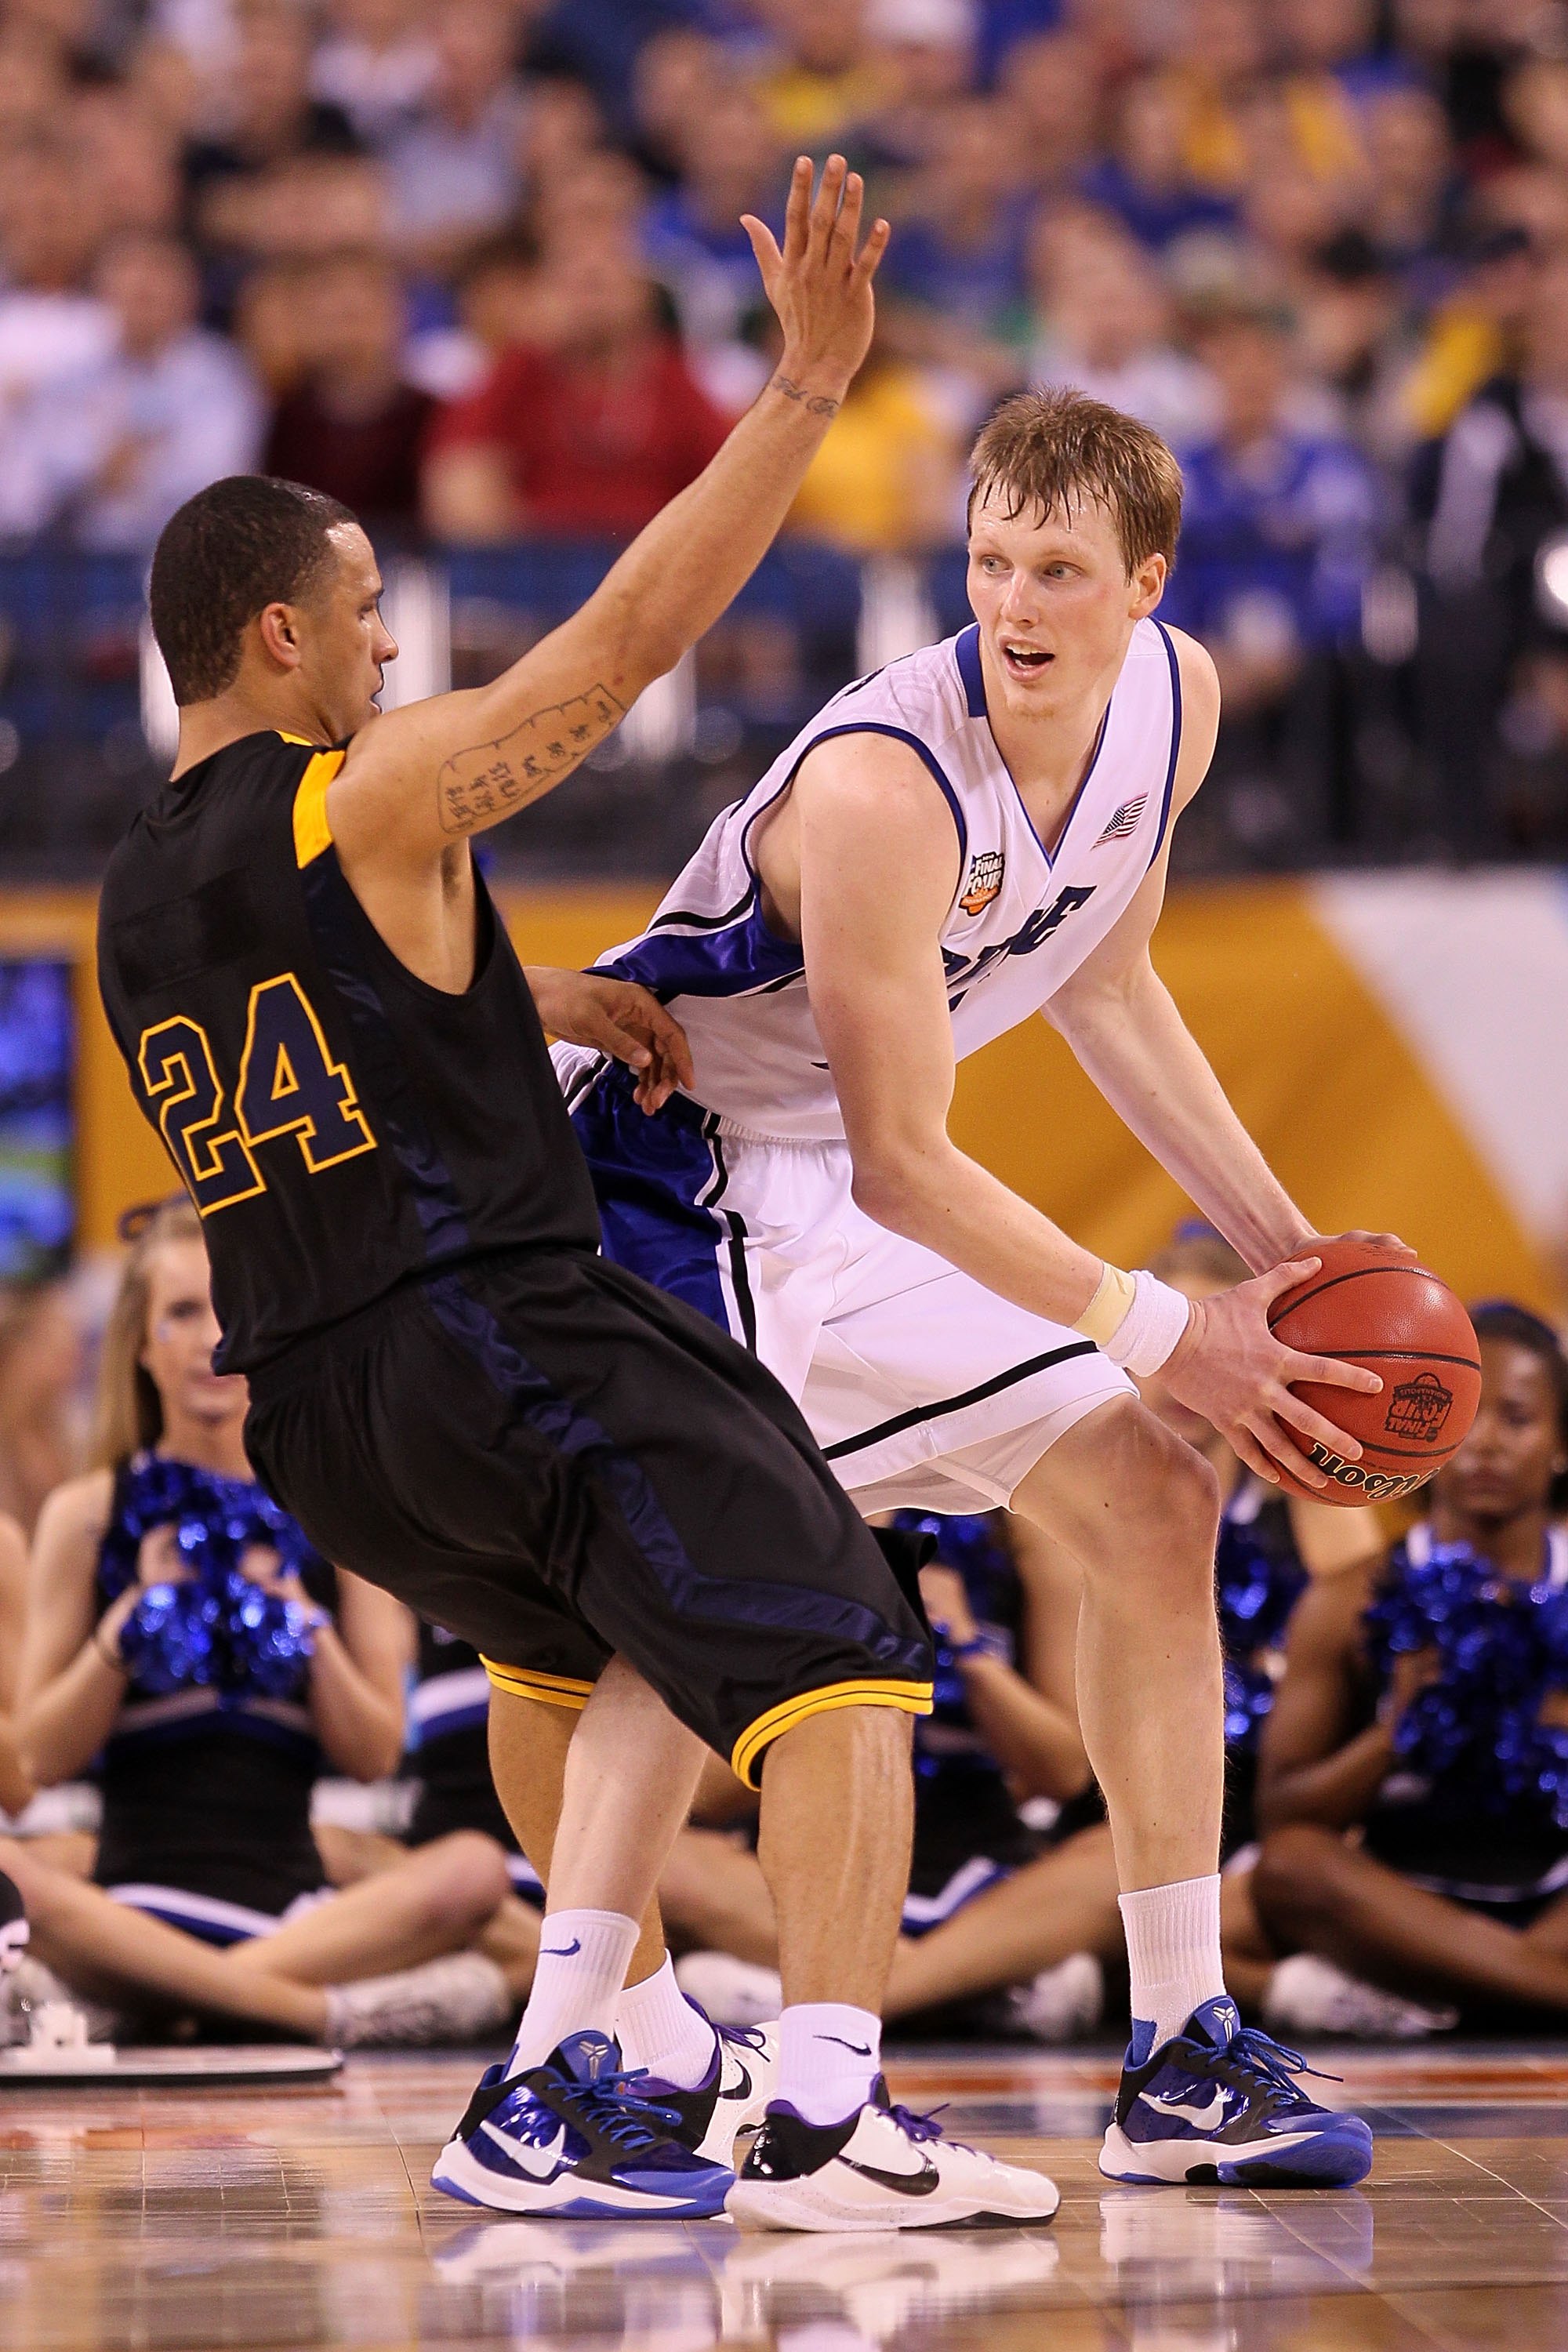 INDIANAPOLIS - APRIL 03:  Kyle Singler #15 of the Duke Blue Devils with the ball against Joe Mazzulla #24 of the West Virginia Mountaineers during the National Semifinal game of the 2010 NCAA Division I Men's Basketball Championship at Lucas Oil Stadium o